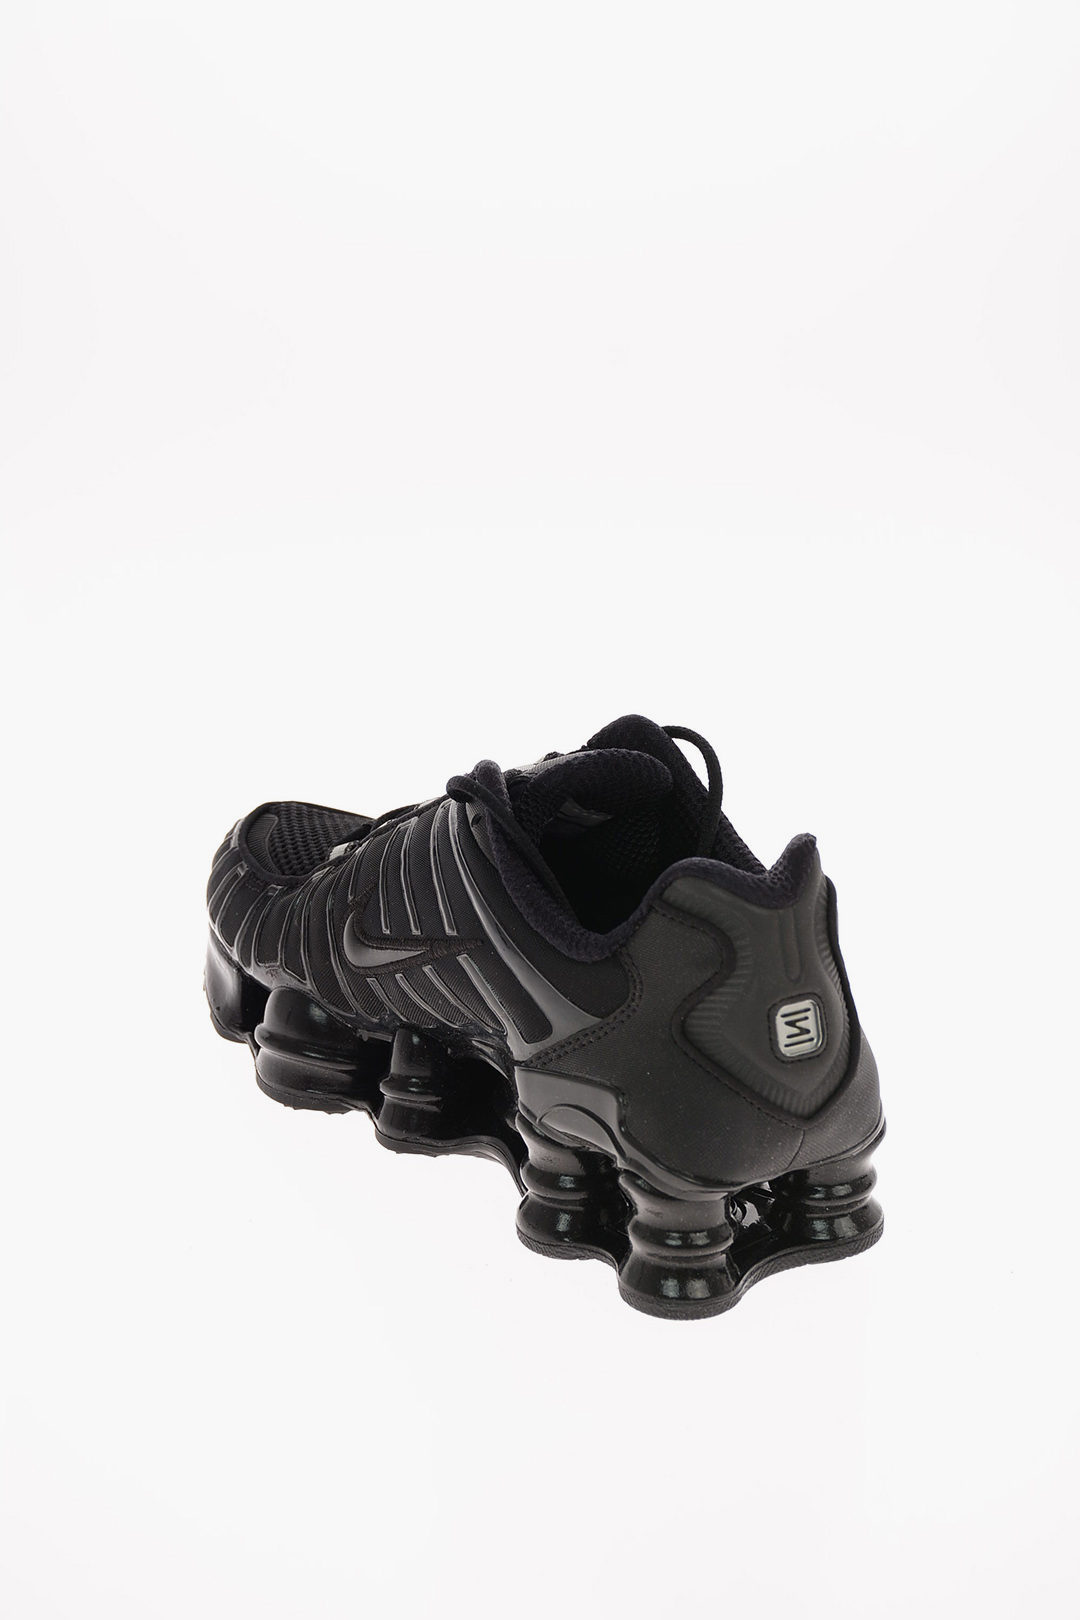 Nike Fabric SHOX TL Sneakers with Air Bubble Sole women - Glamood Outlet